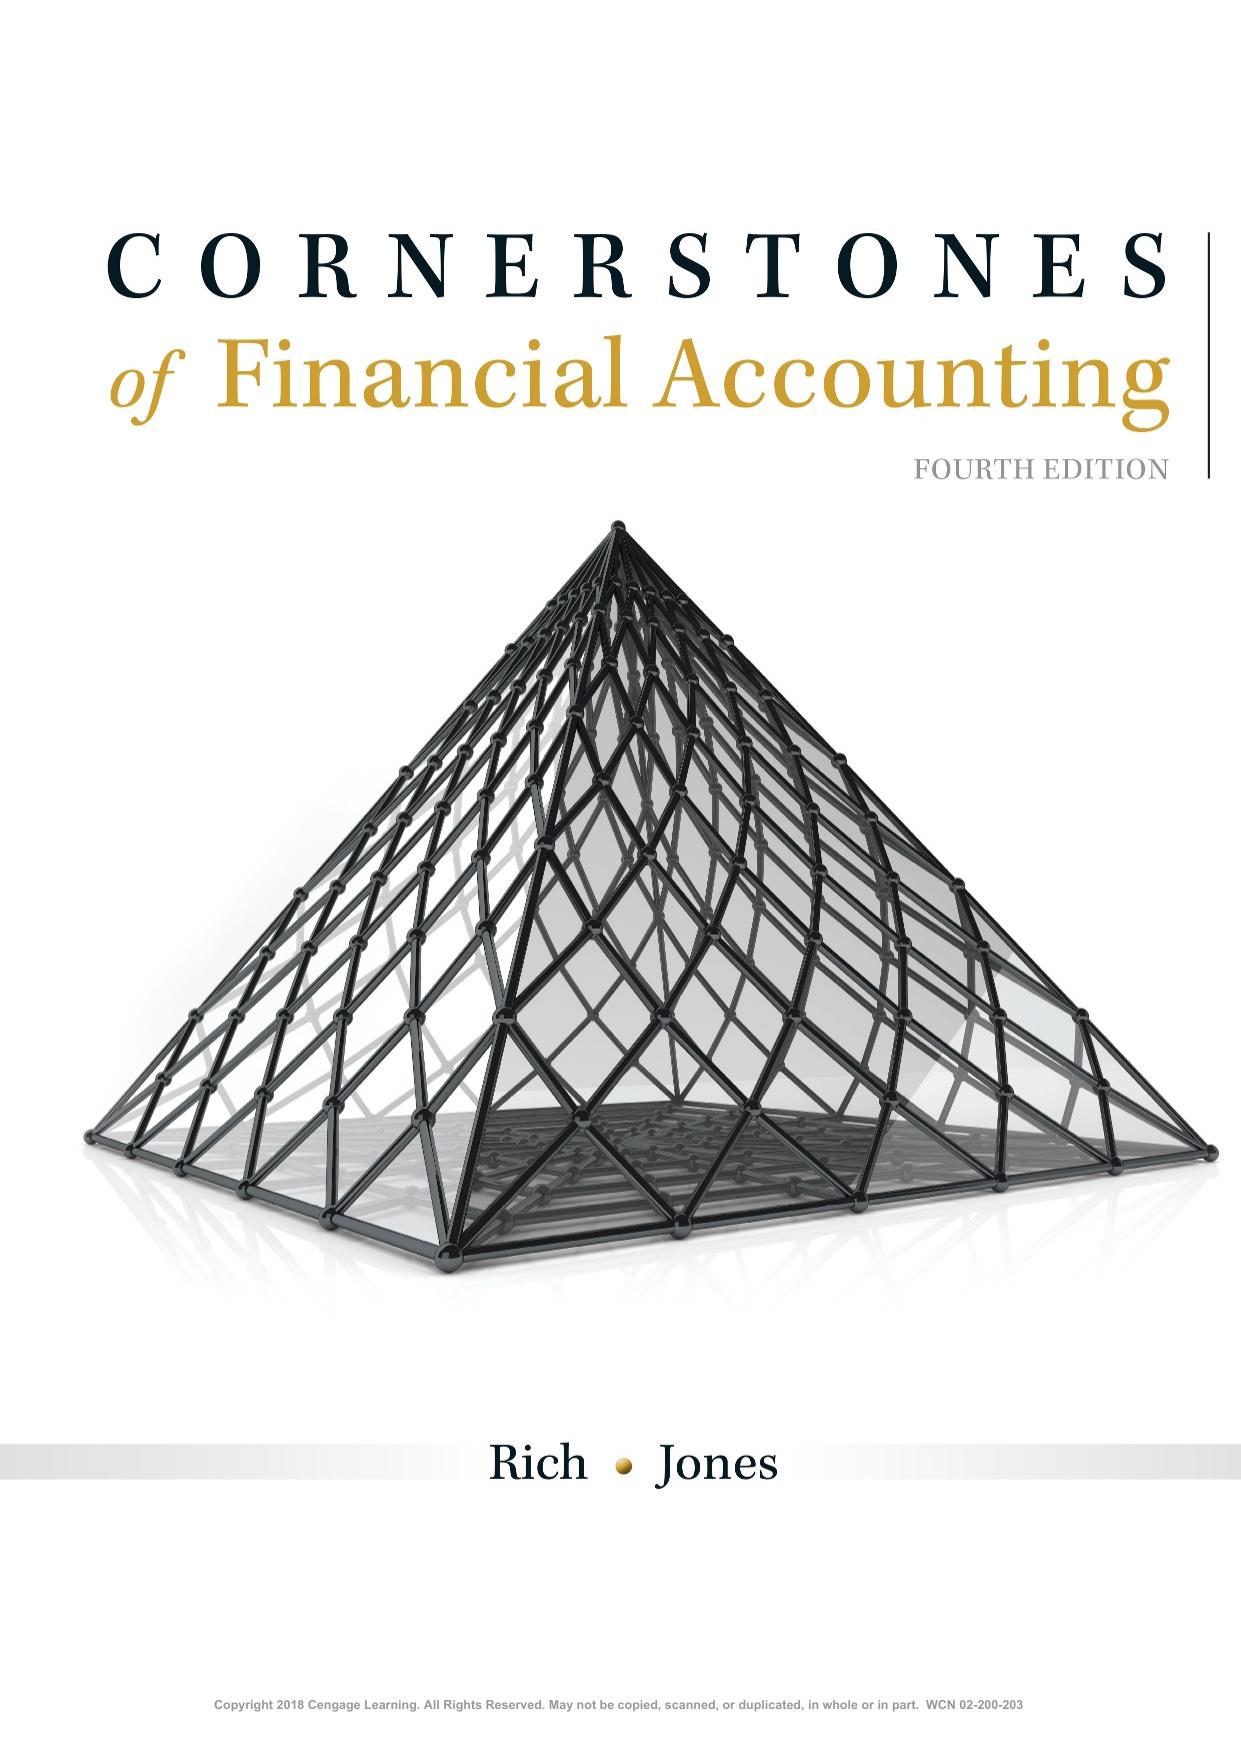 Cornerstones of Financial Accounting 4th Edition by Jay S. Rich.jpg